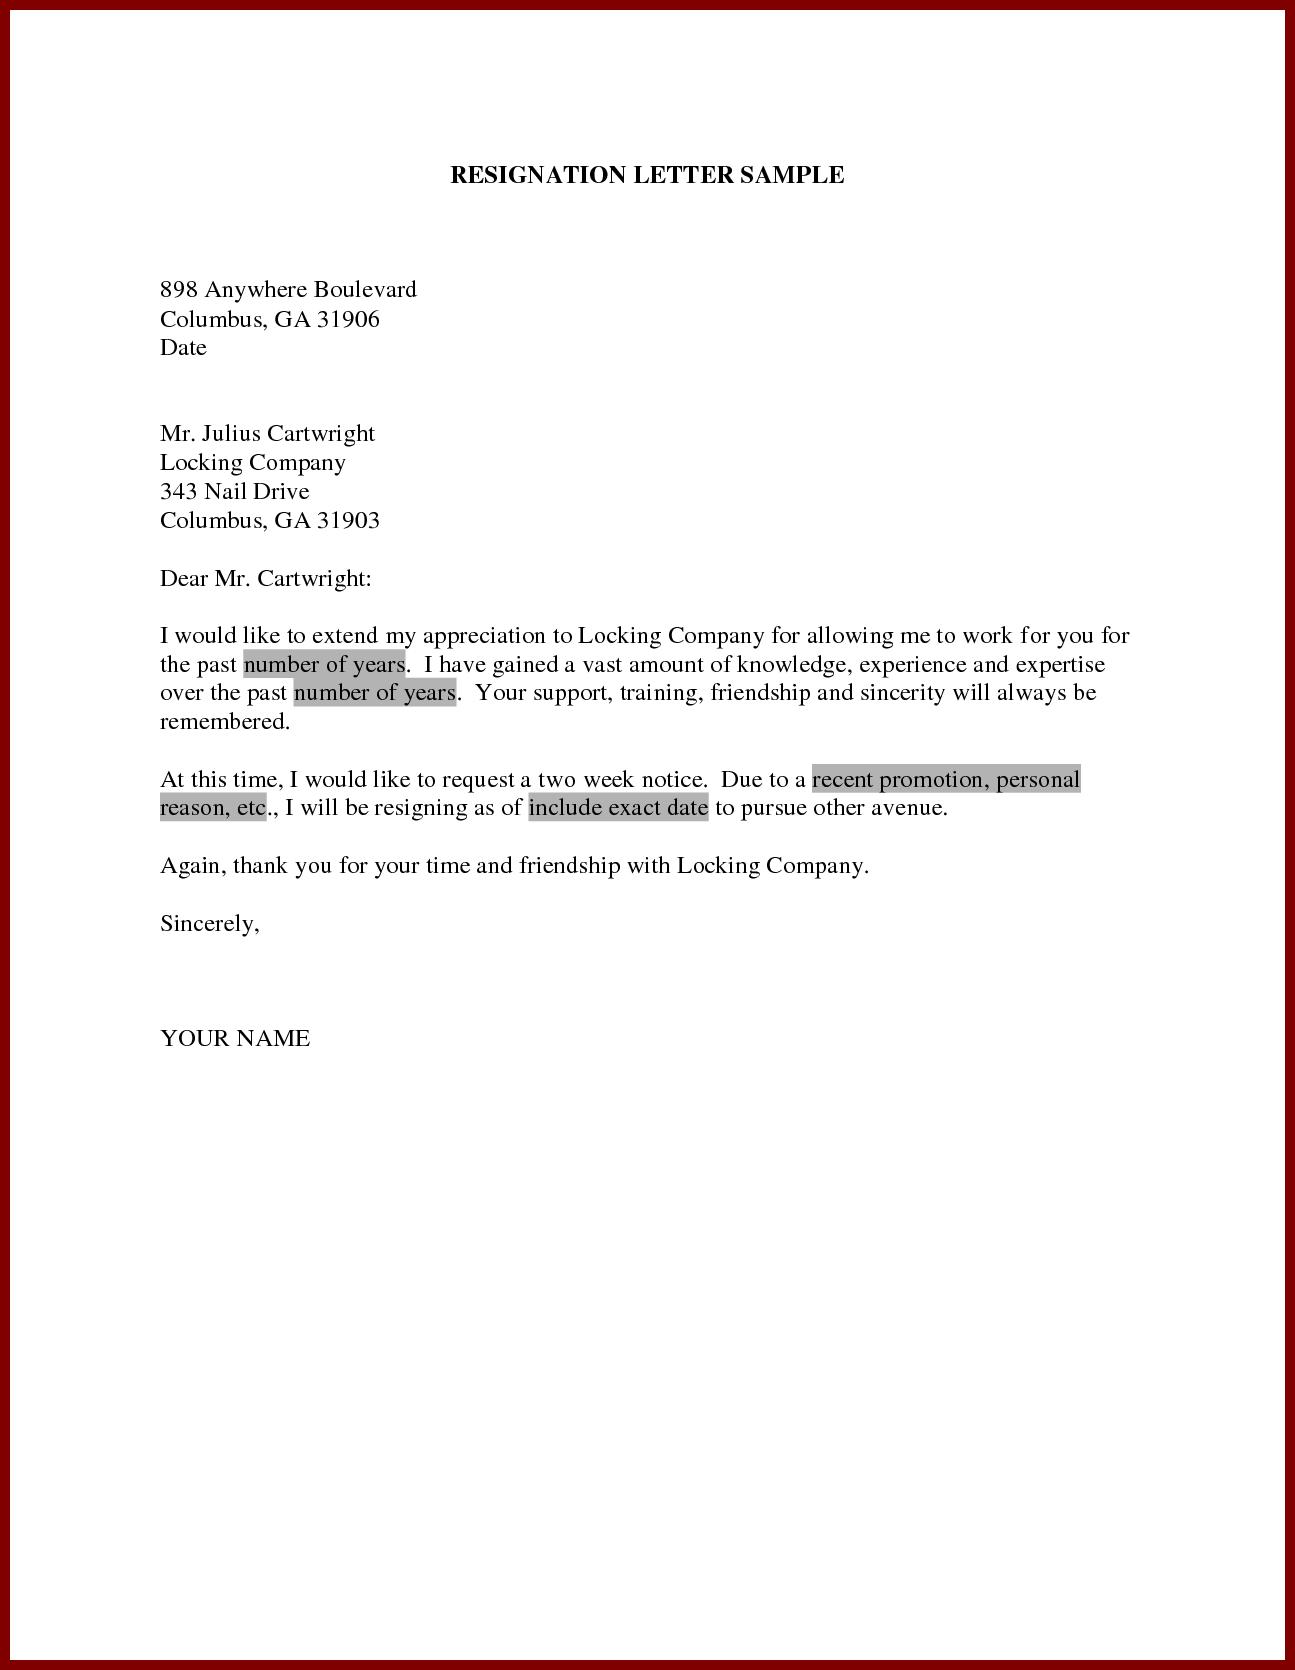 Resignation Letter Templates 16 for Android - APK Download